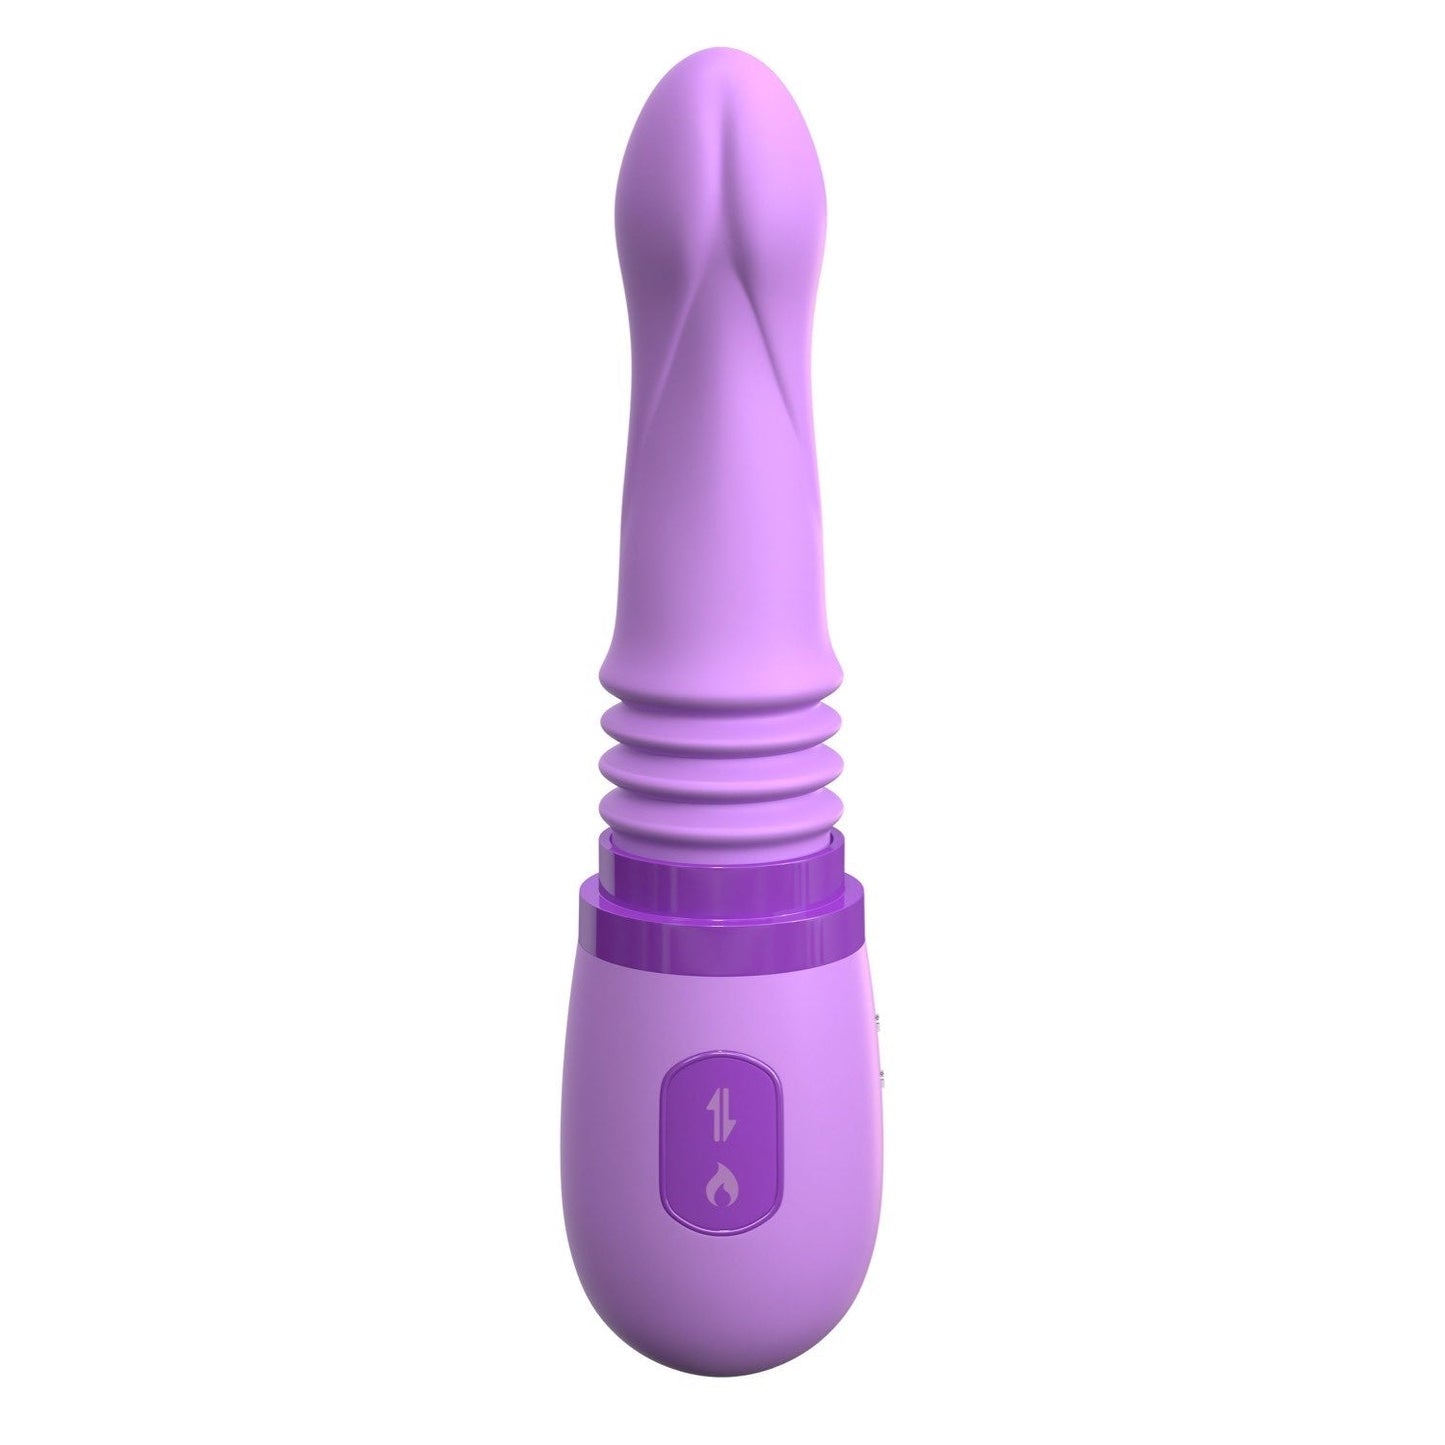 Personal Sex Machine - Purple 21.3 cm (8.5") USB Rechargeable Thrusting & Gyrating Vibrator